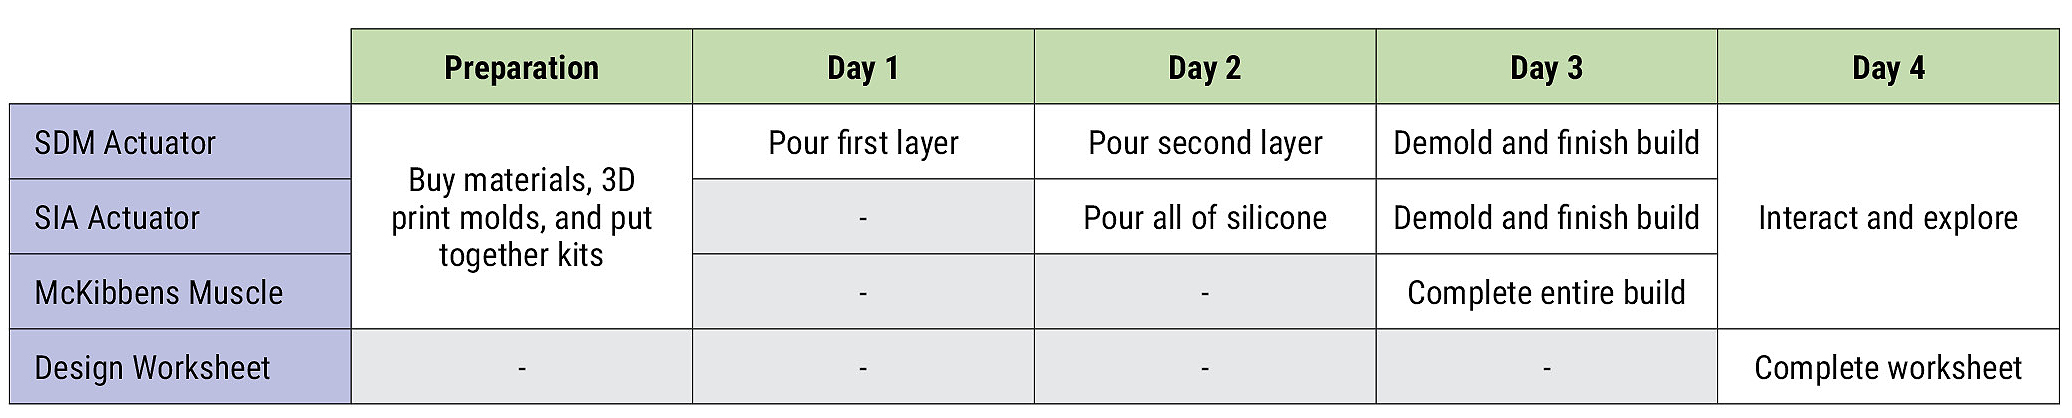 Figure 2 Daily schedule for three soft robotic activities and design worksheet.